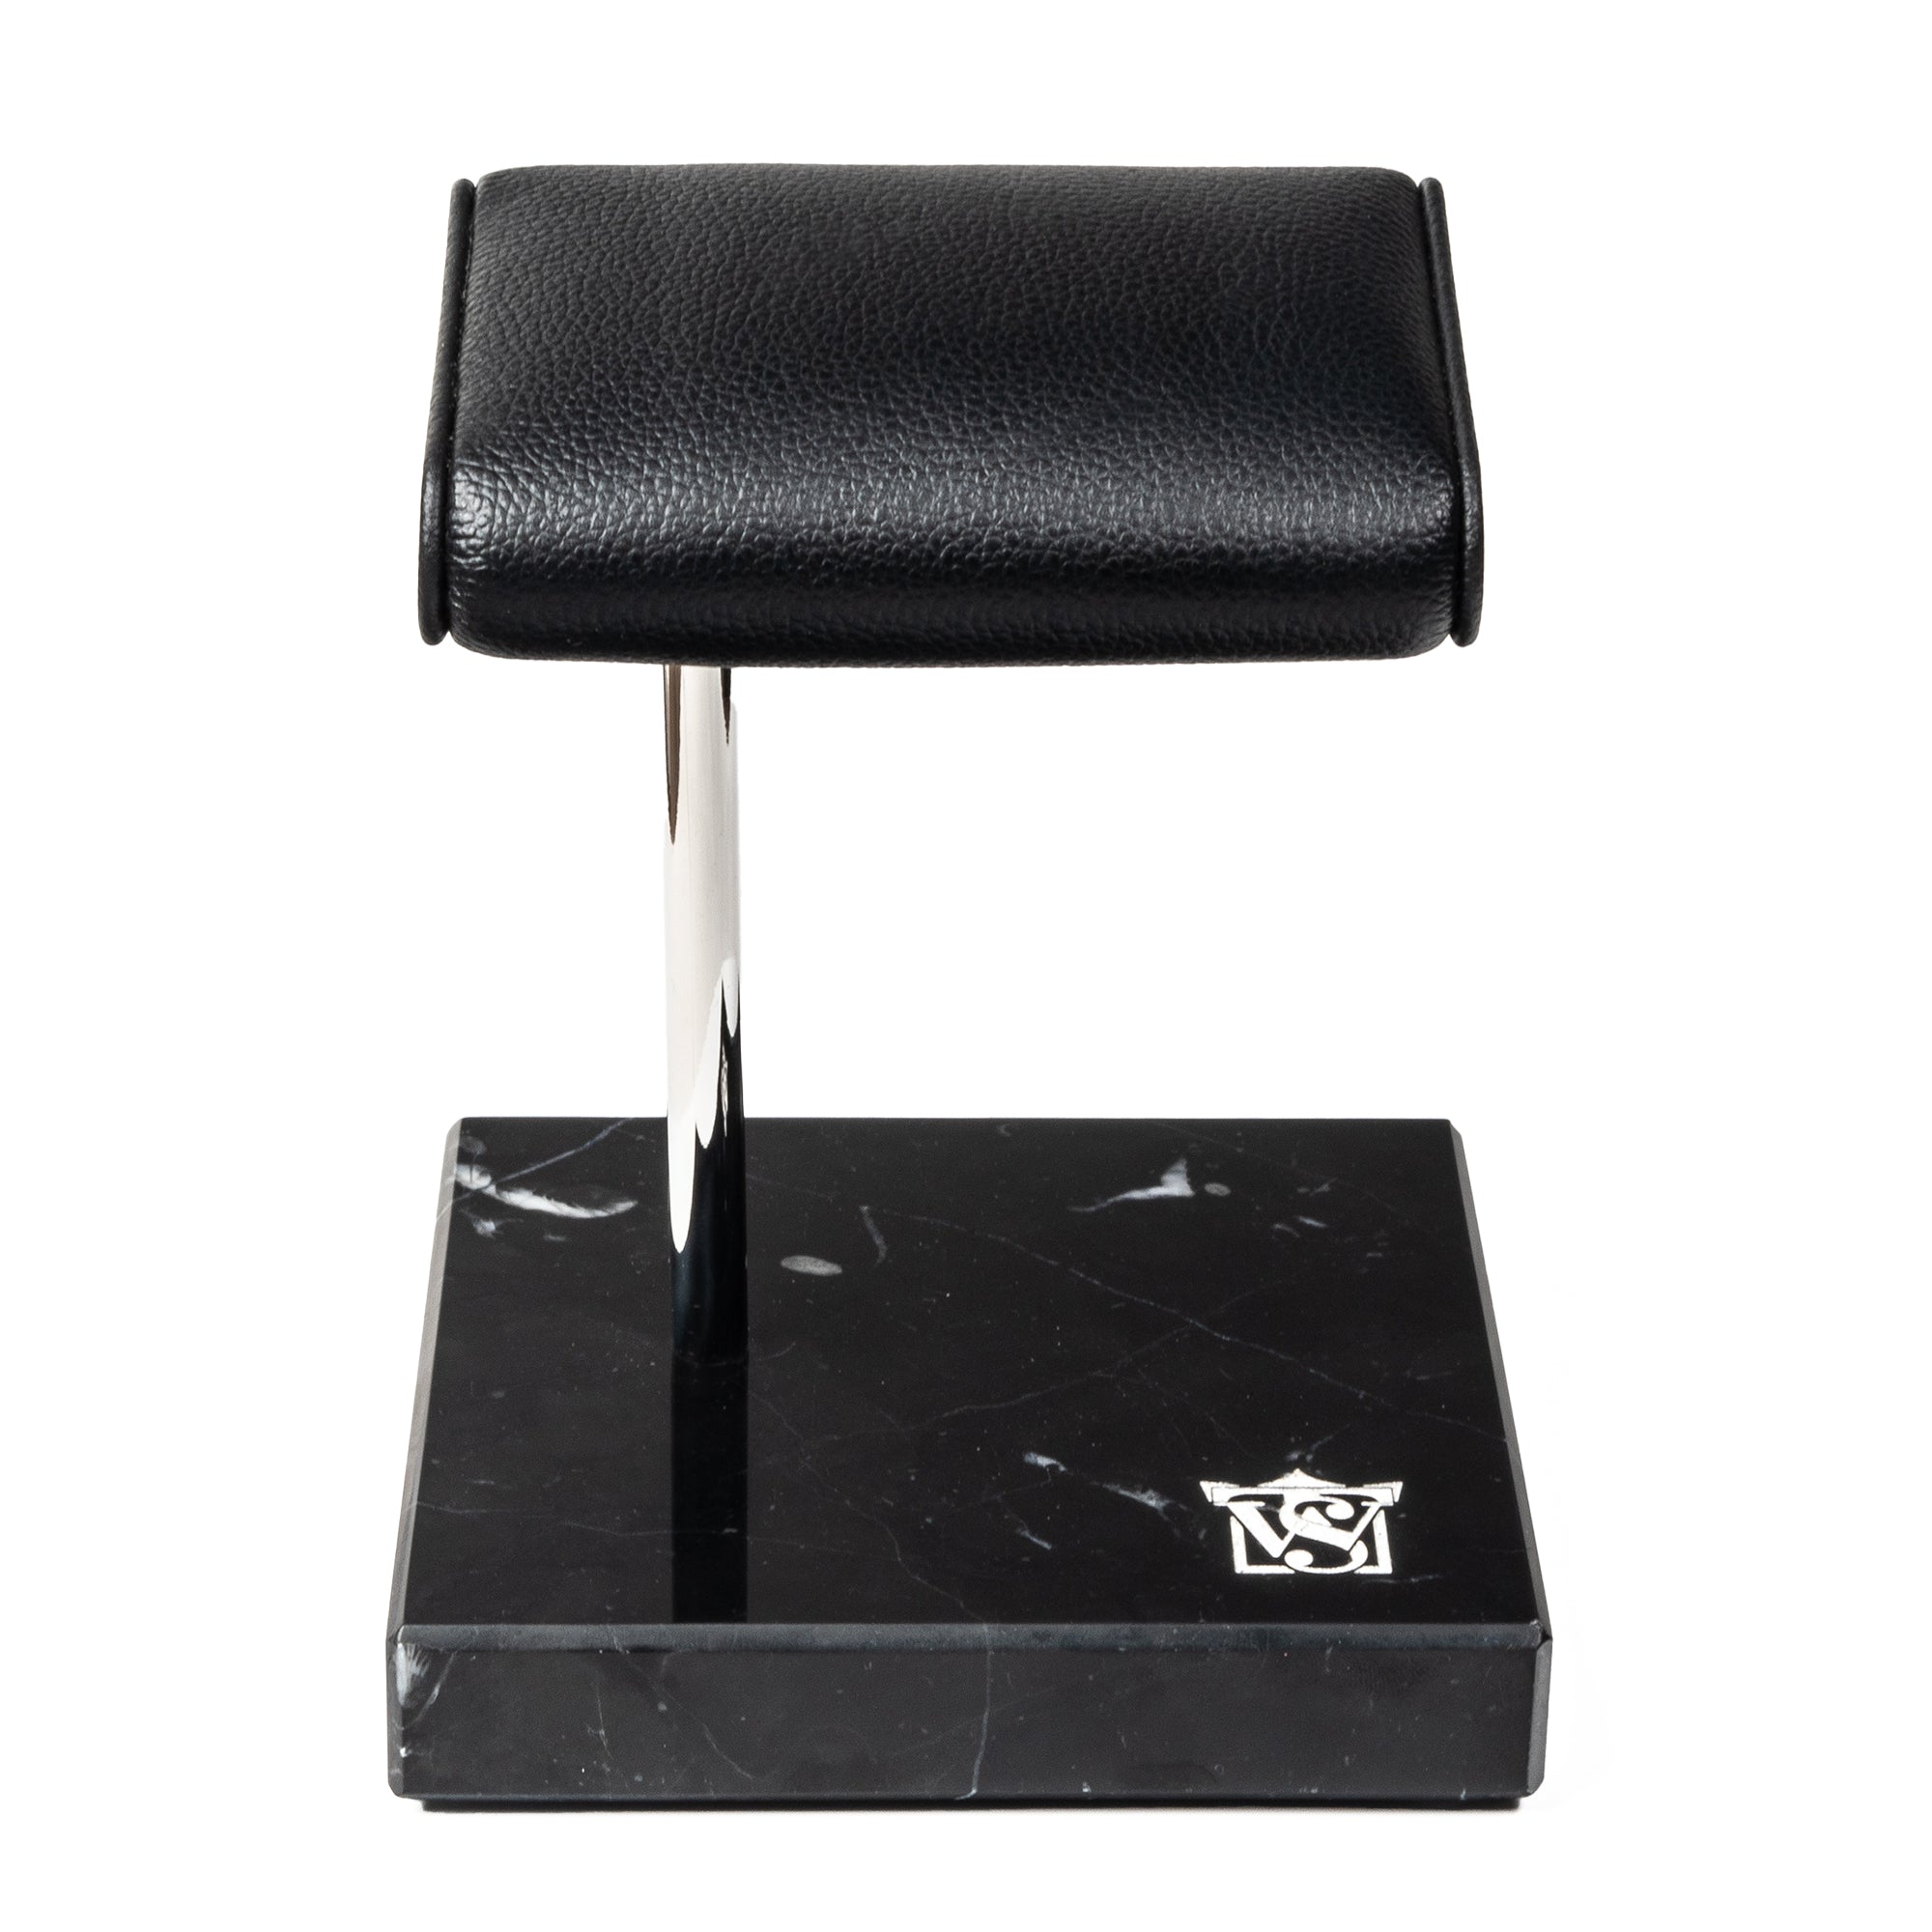 WATCH STAND CLASSIC - SINGLE - BLACK & SILVER